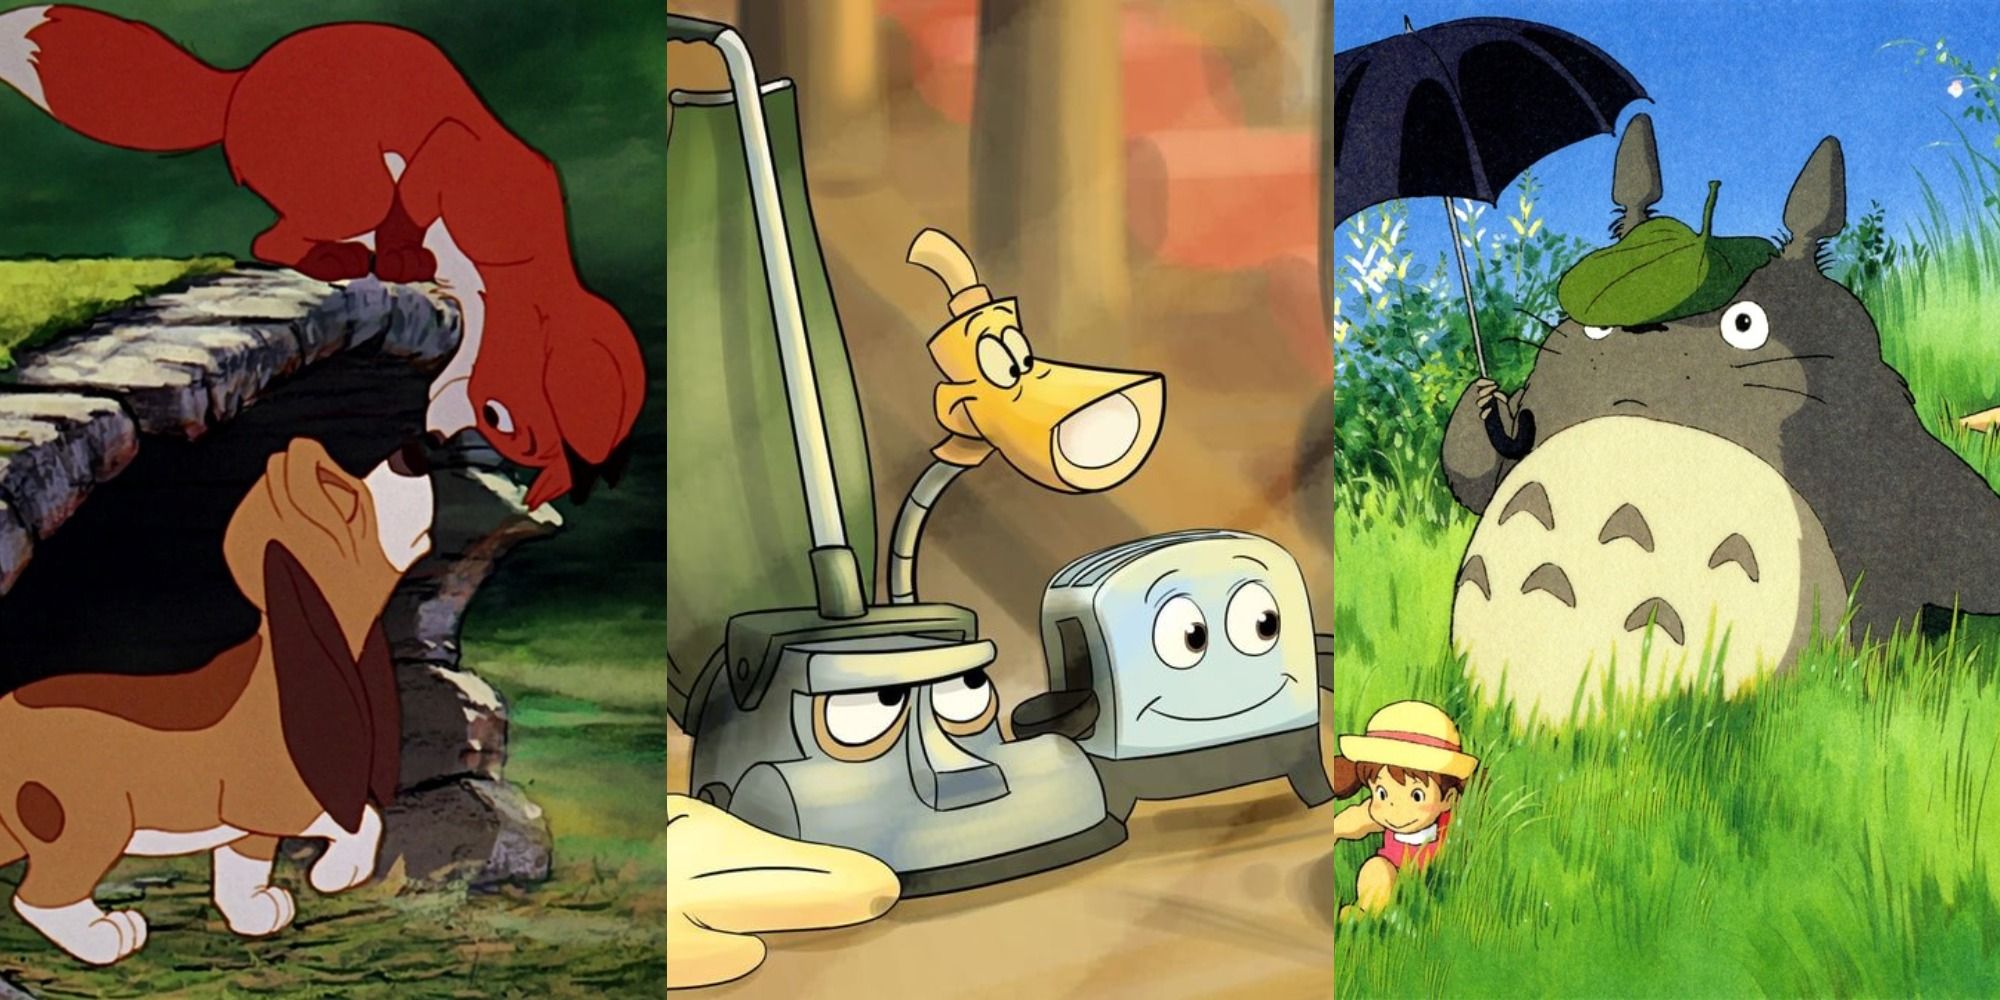 Split image of Fox and the Hound, the Brave Little Toaster, and My Neighbor Totoro